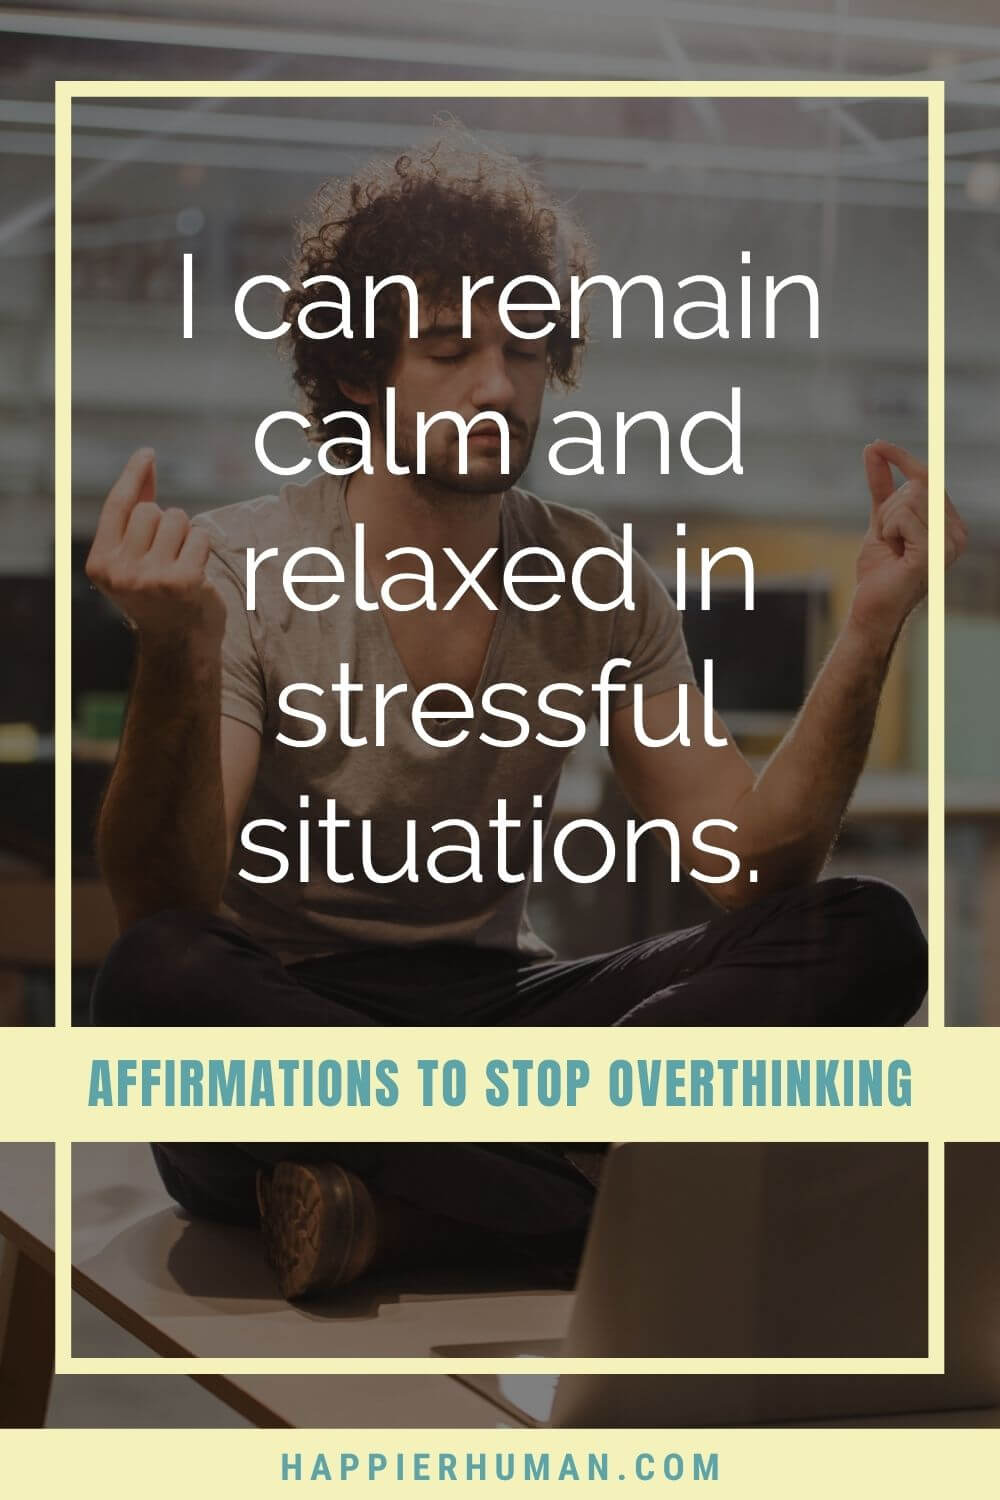 Affirmations for Overthinking - I can remain calm and relaxed in stressful situations. | affirmations for confidence | positive affirmations for rumination | 100 positive affirmations for anxiety